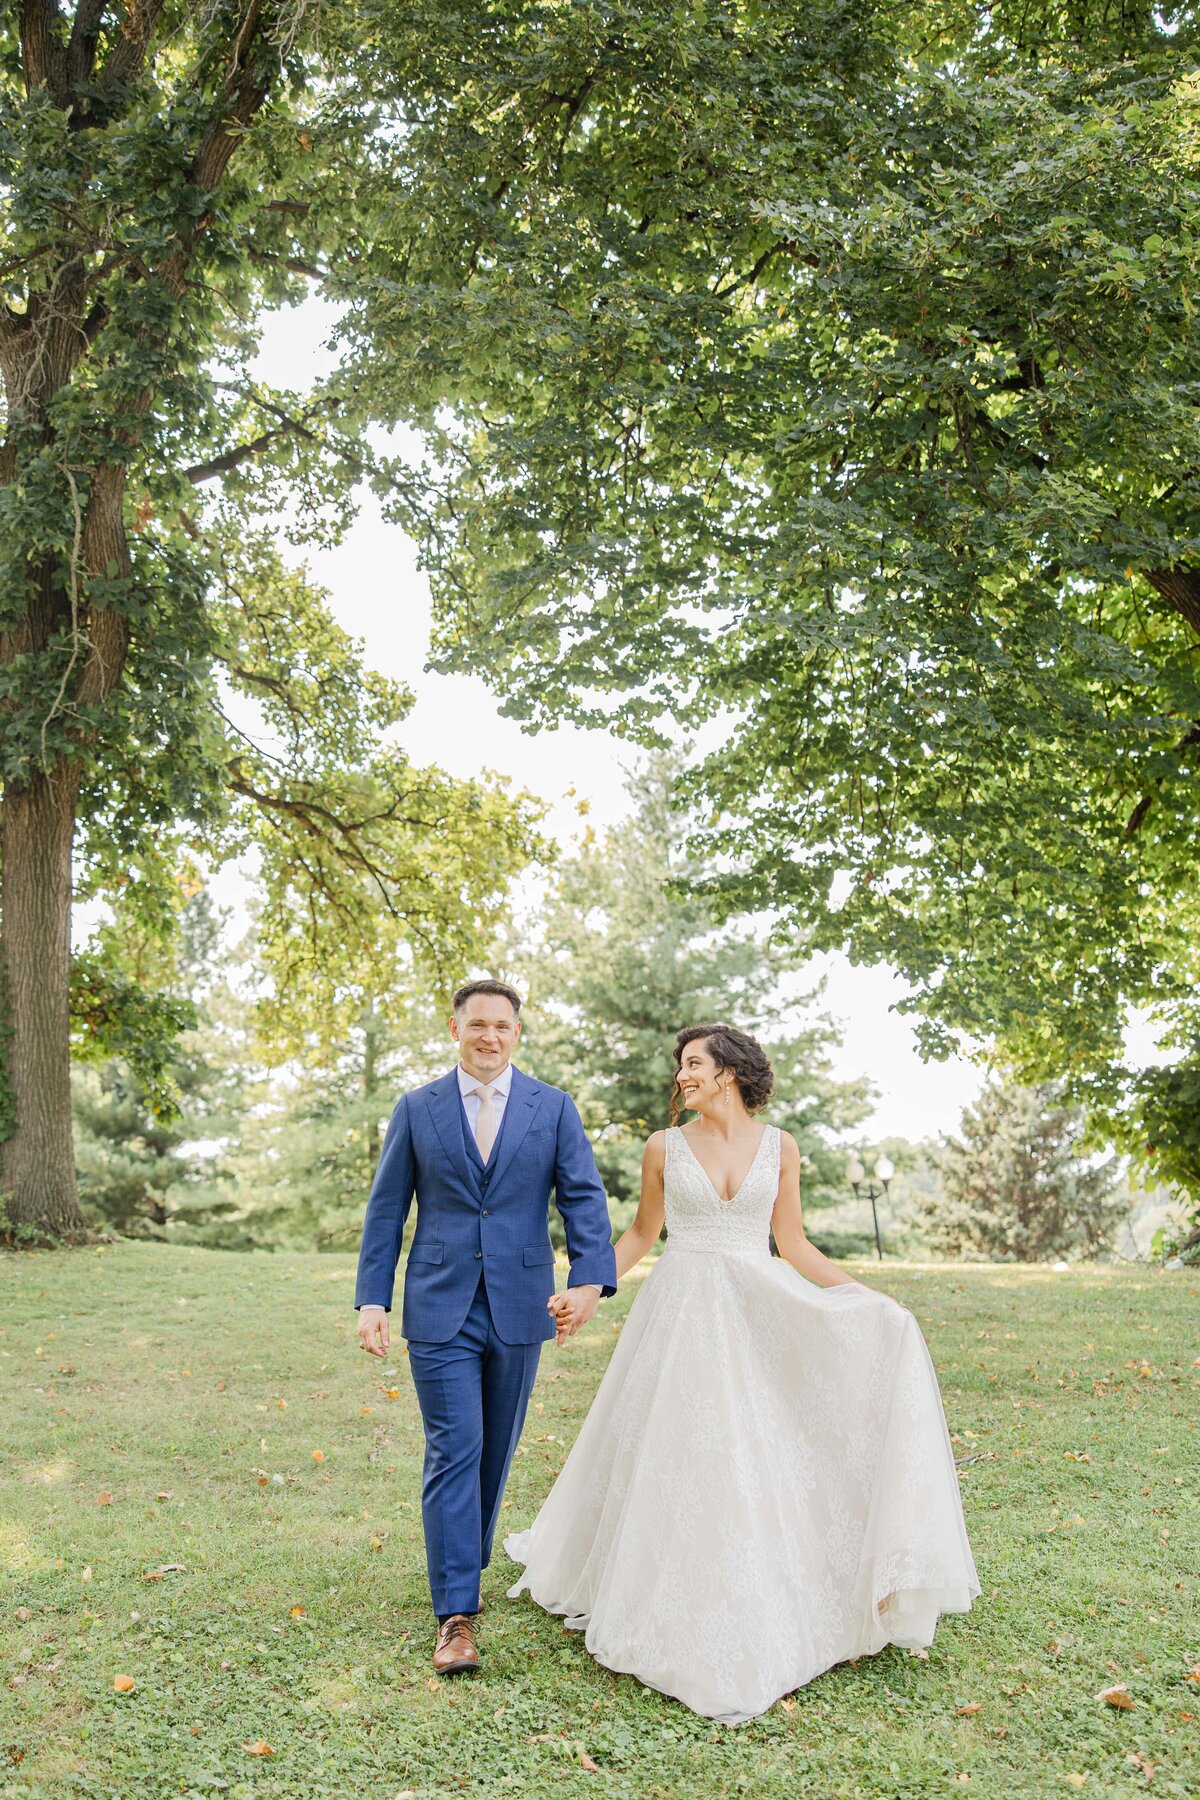 A bride in a white dress and a groom in a blue suit walk hand in hand through a grassy park in Iowa, smiling joyfully.